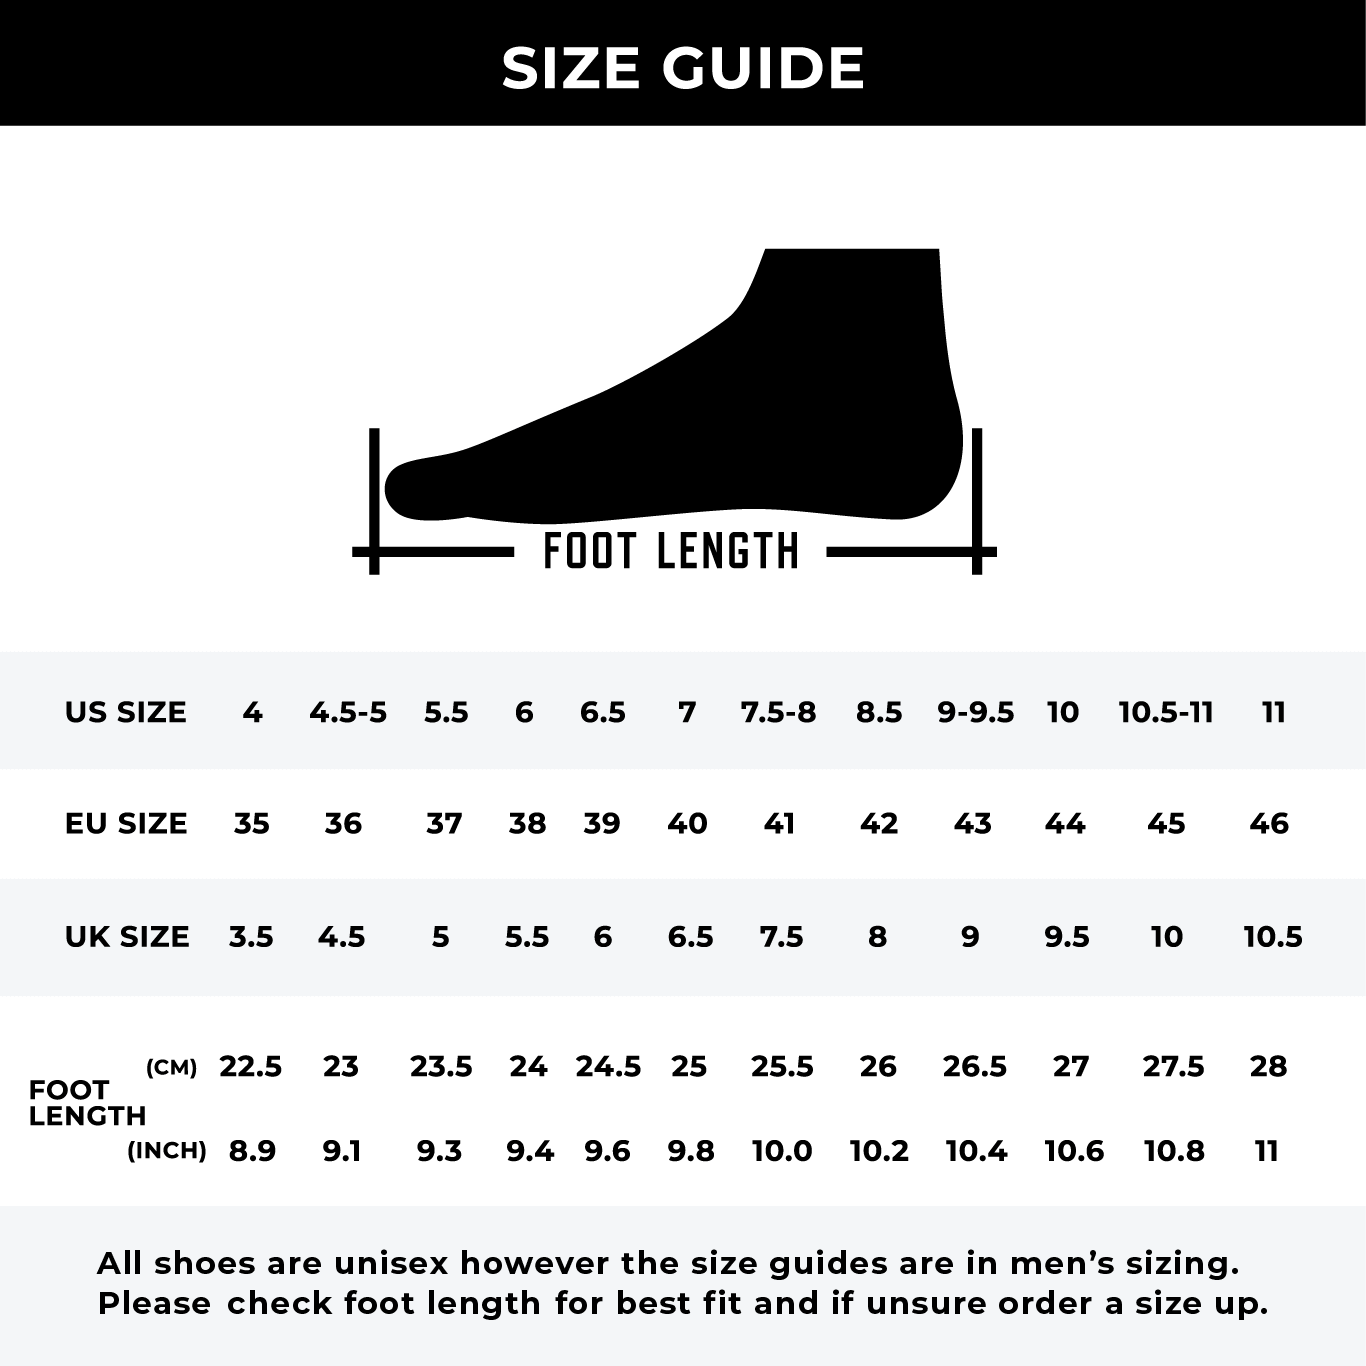 MBR Sprint Track Spikes Size Guide